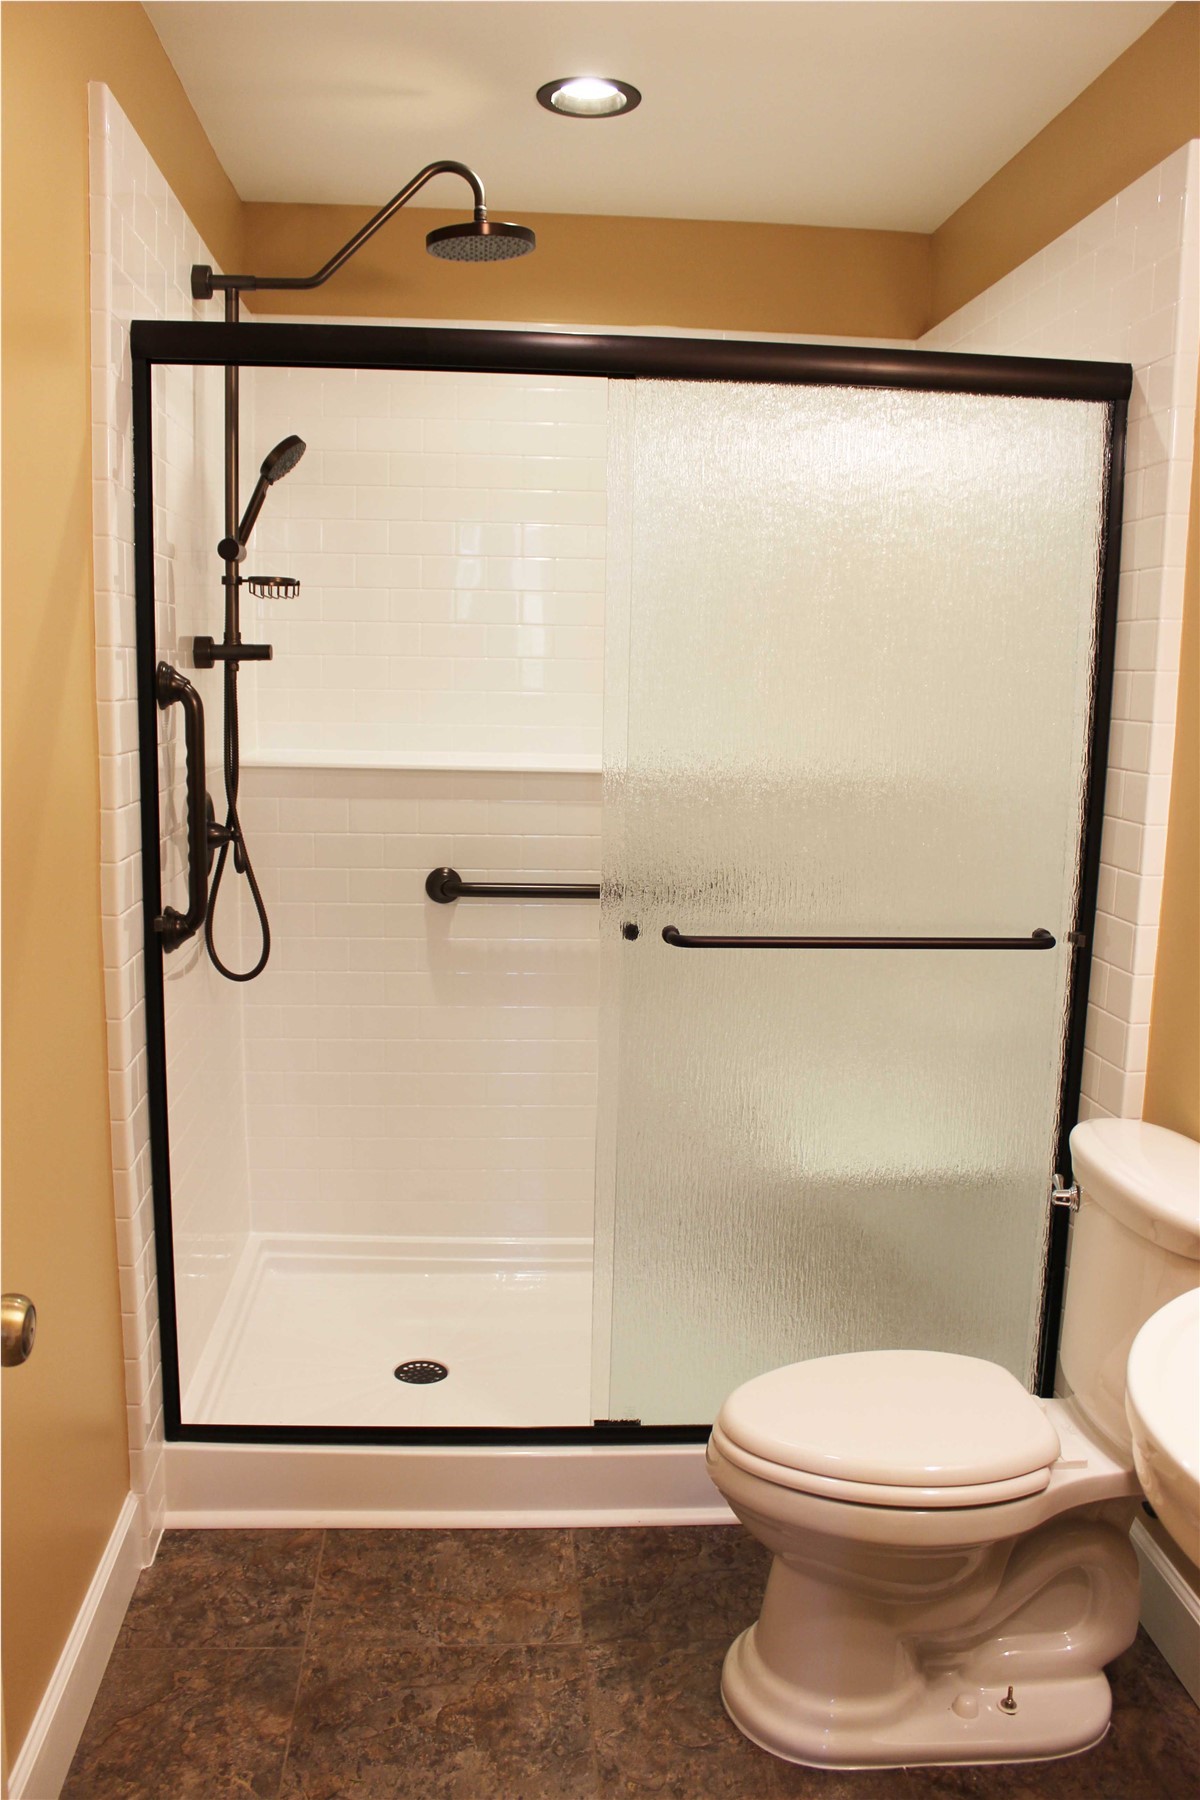 Top Reasons to Complete Your New Bathroom Remodel Before Winter!